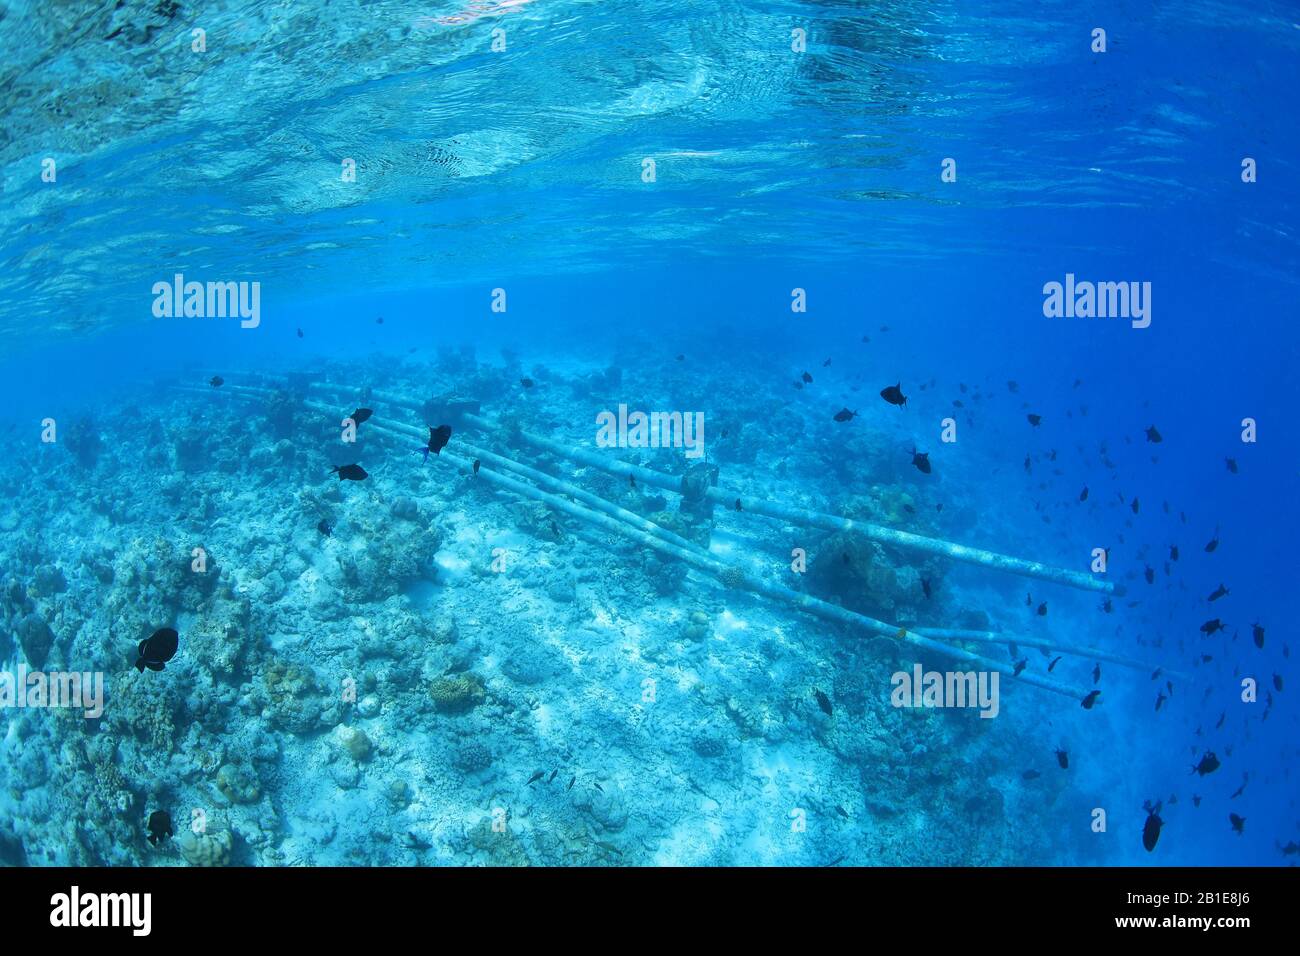 Sewer wastewater pipes underwater in the tropical coral reef of the indian ocean Stock Photo